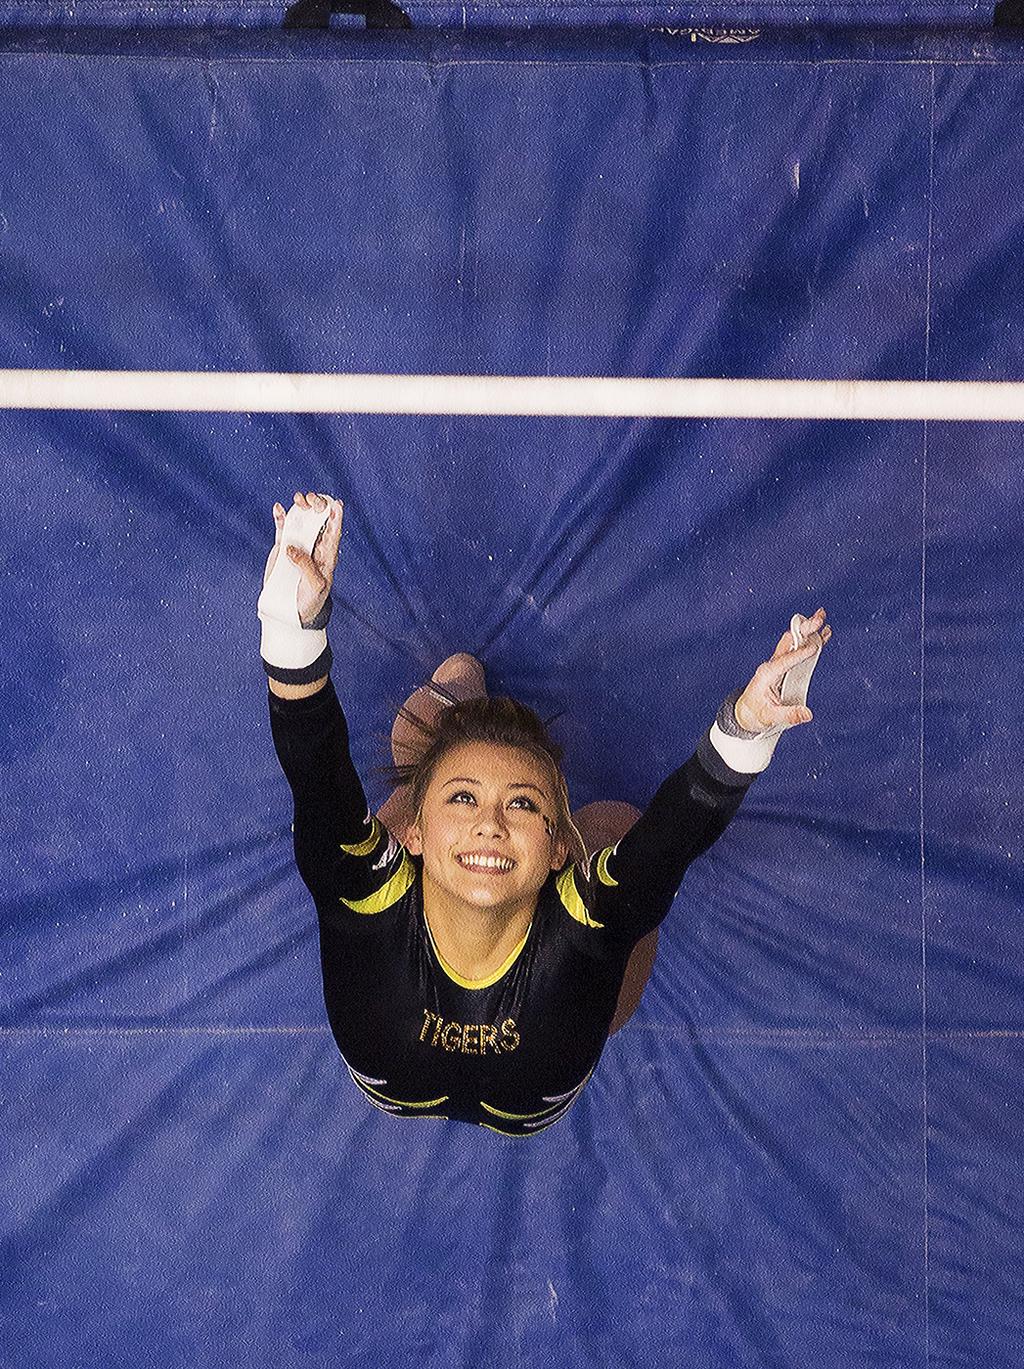 In 2011, earned a 23rd place finish in the all-around at the U.S. Junior Olympics competition. Bars: 9.725 (Exh. at NC State, 2014) Beam: 9.775 (vs.